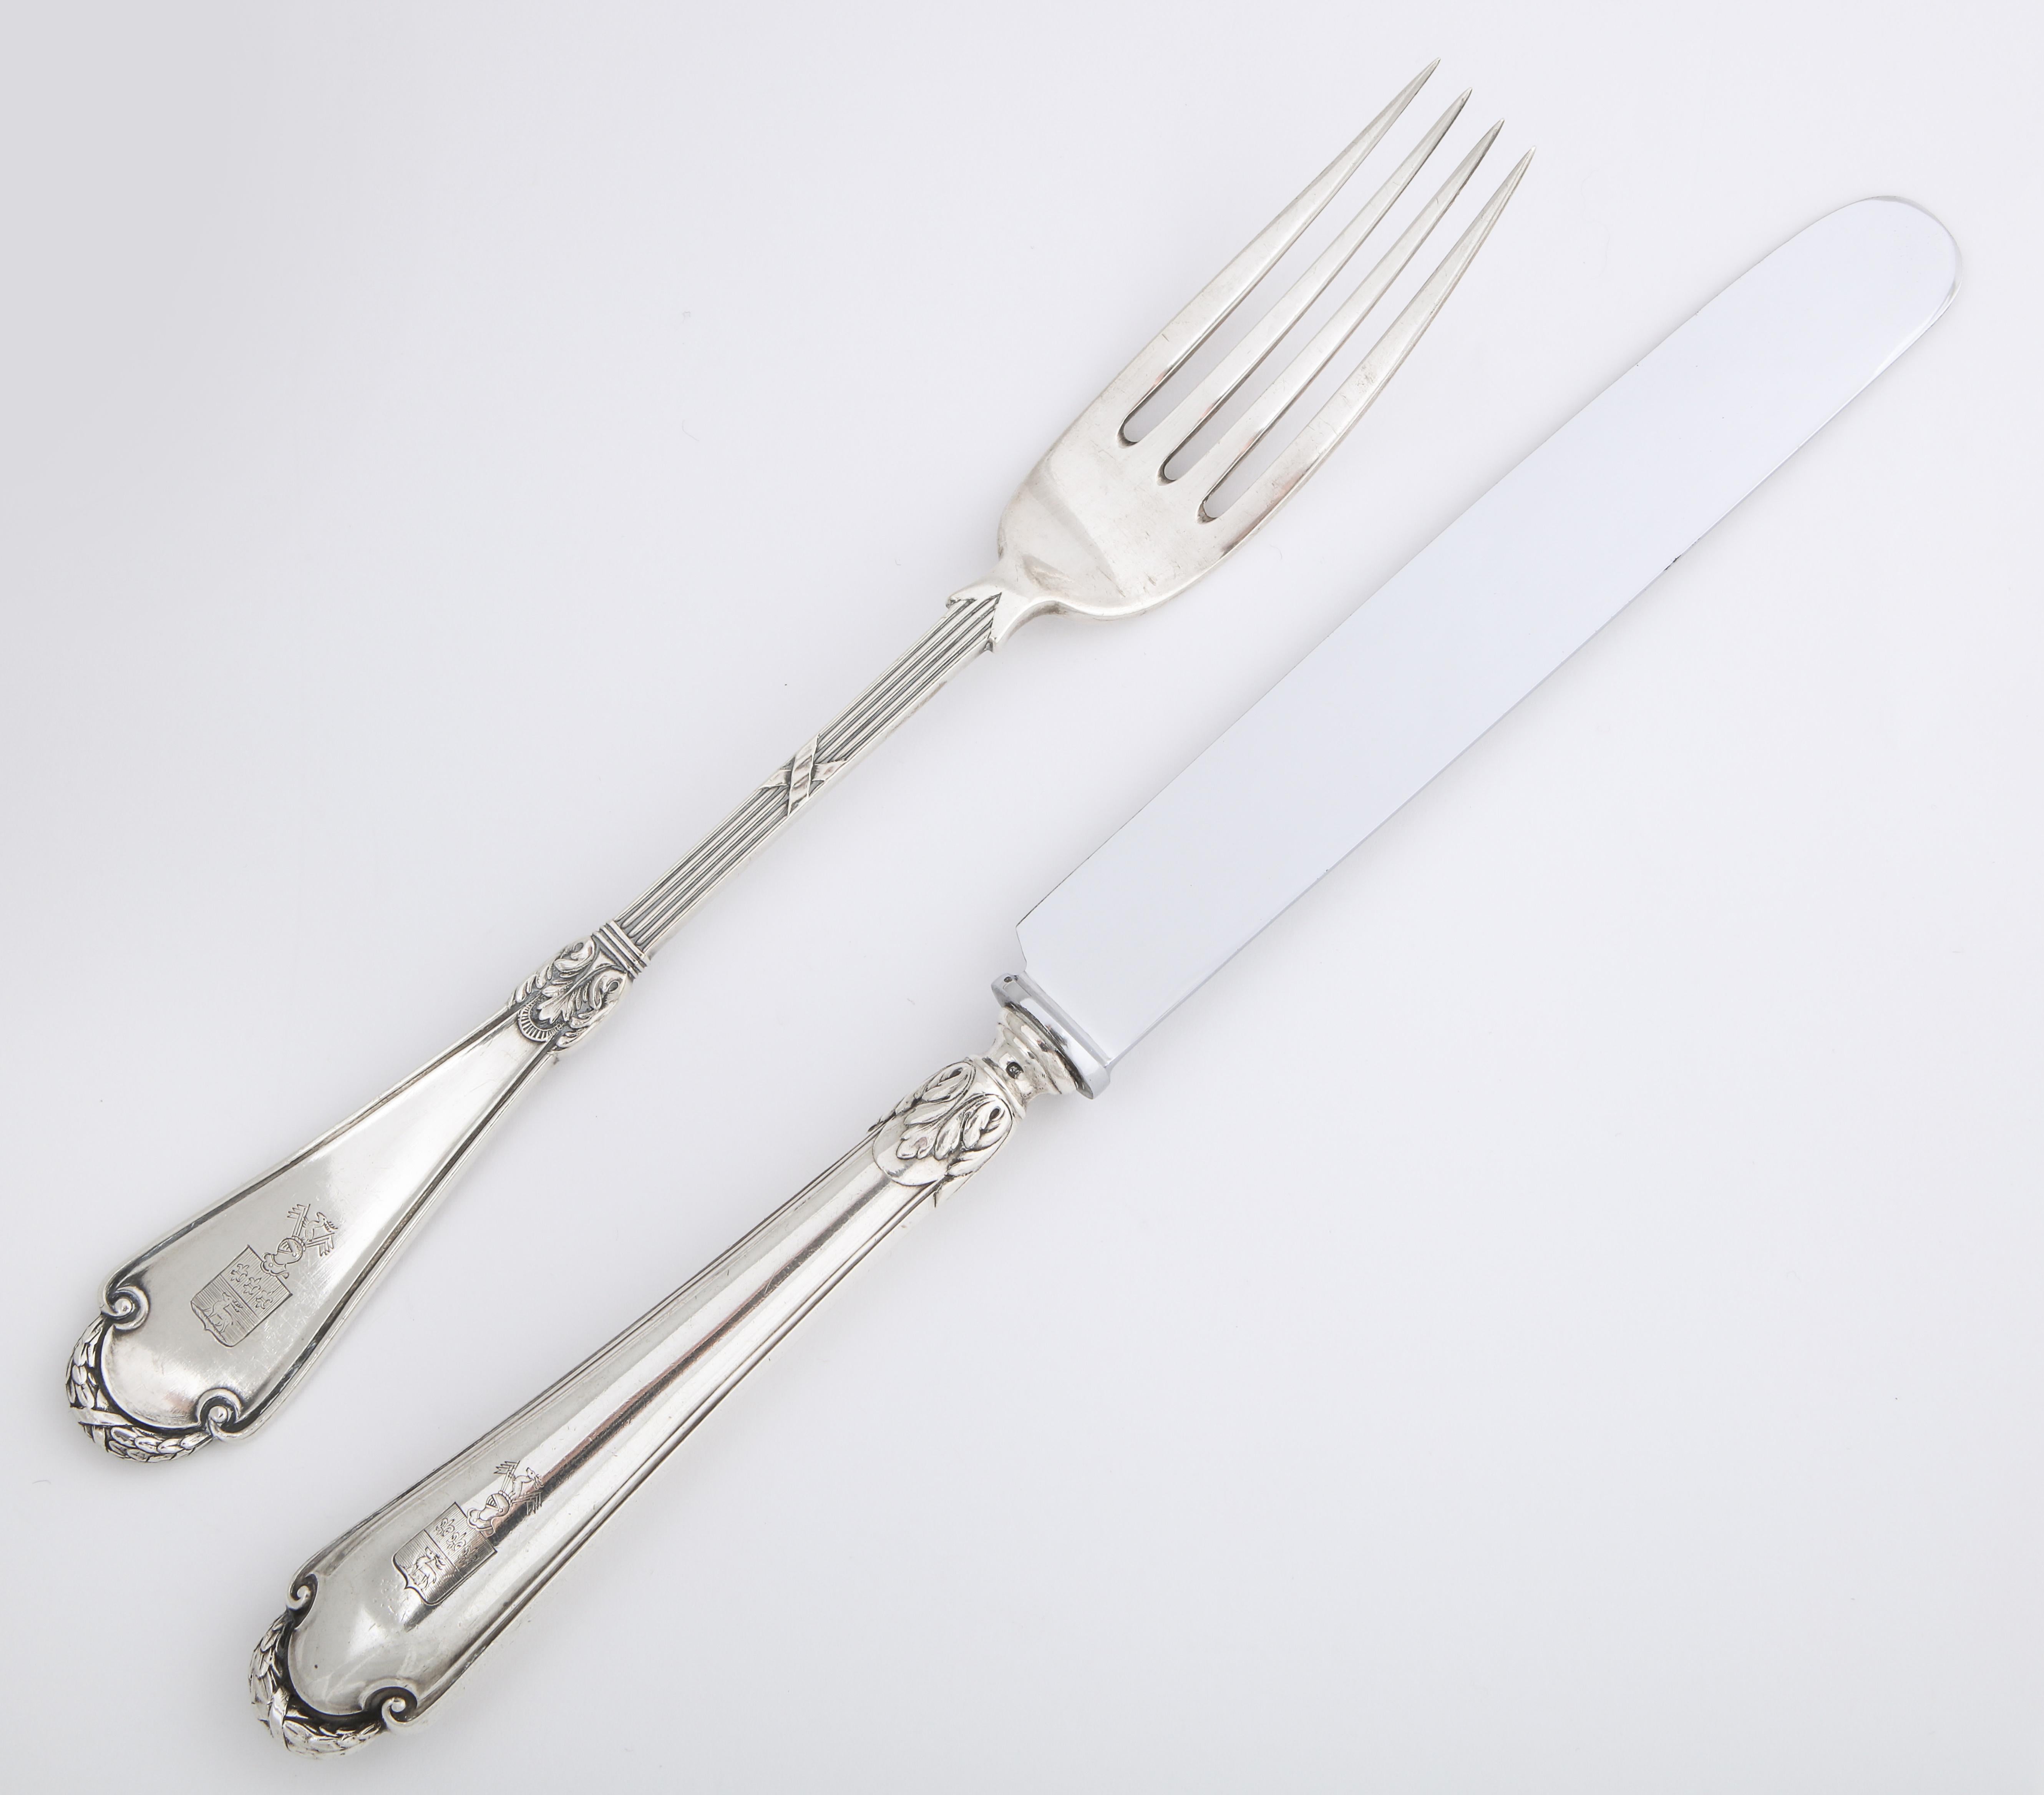 From the Romanov era, period of Tsar Nicholas II, a silver knife and fork pair in the classical taste by Russia’s most famous silversmith, Carl Fabergé, the fork enhanced with reed-and-tie stem and shaped handle, the knife en suite, fitted with a